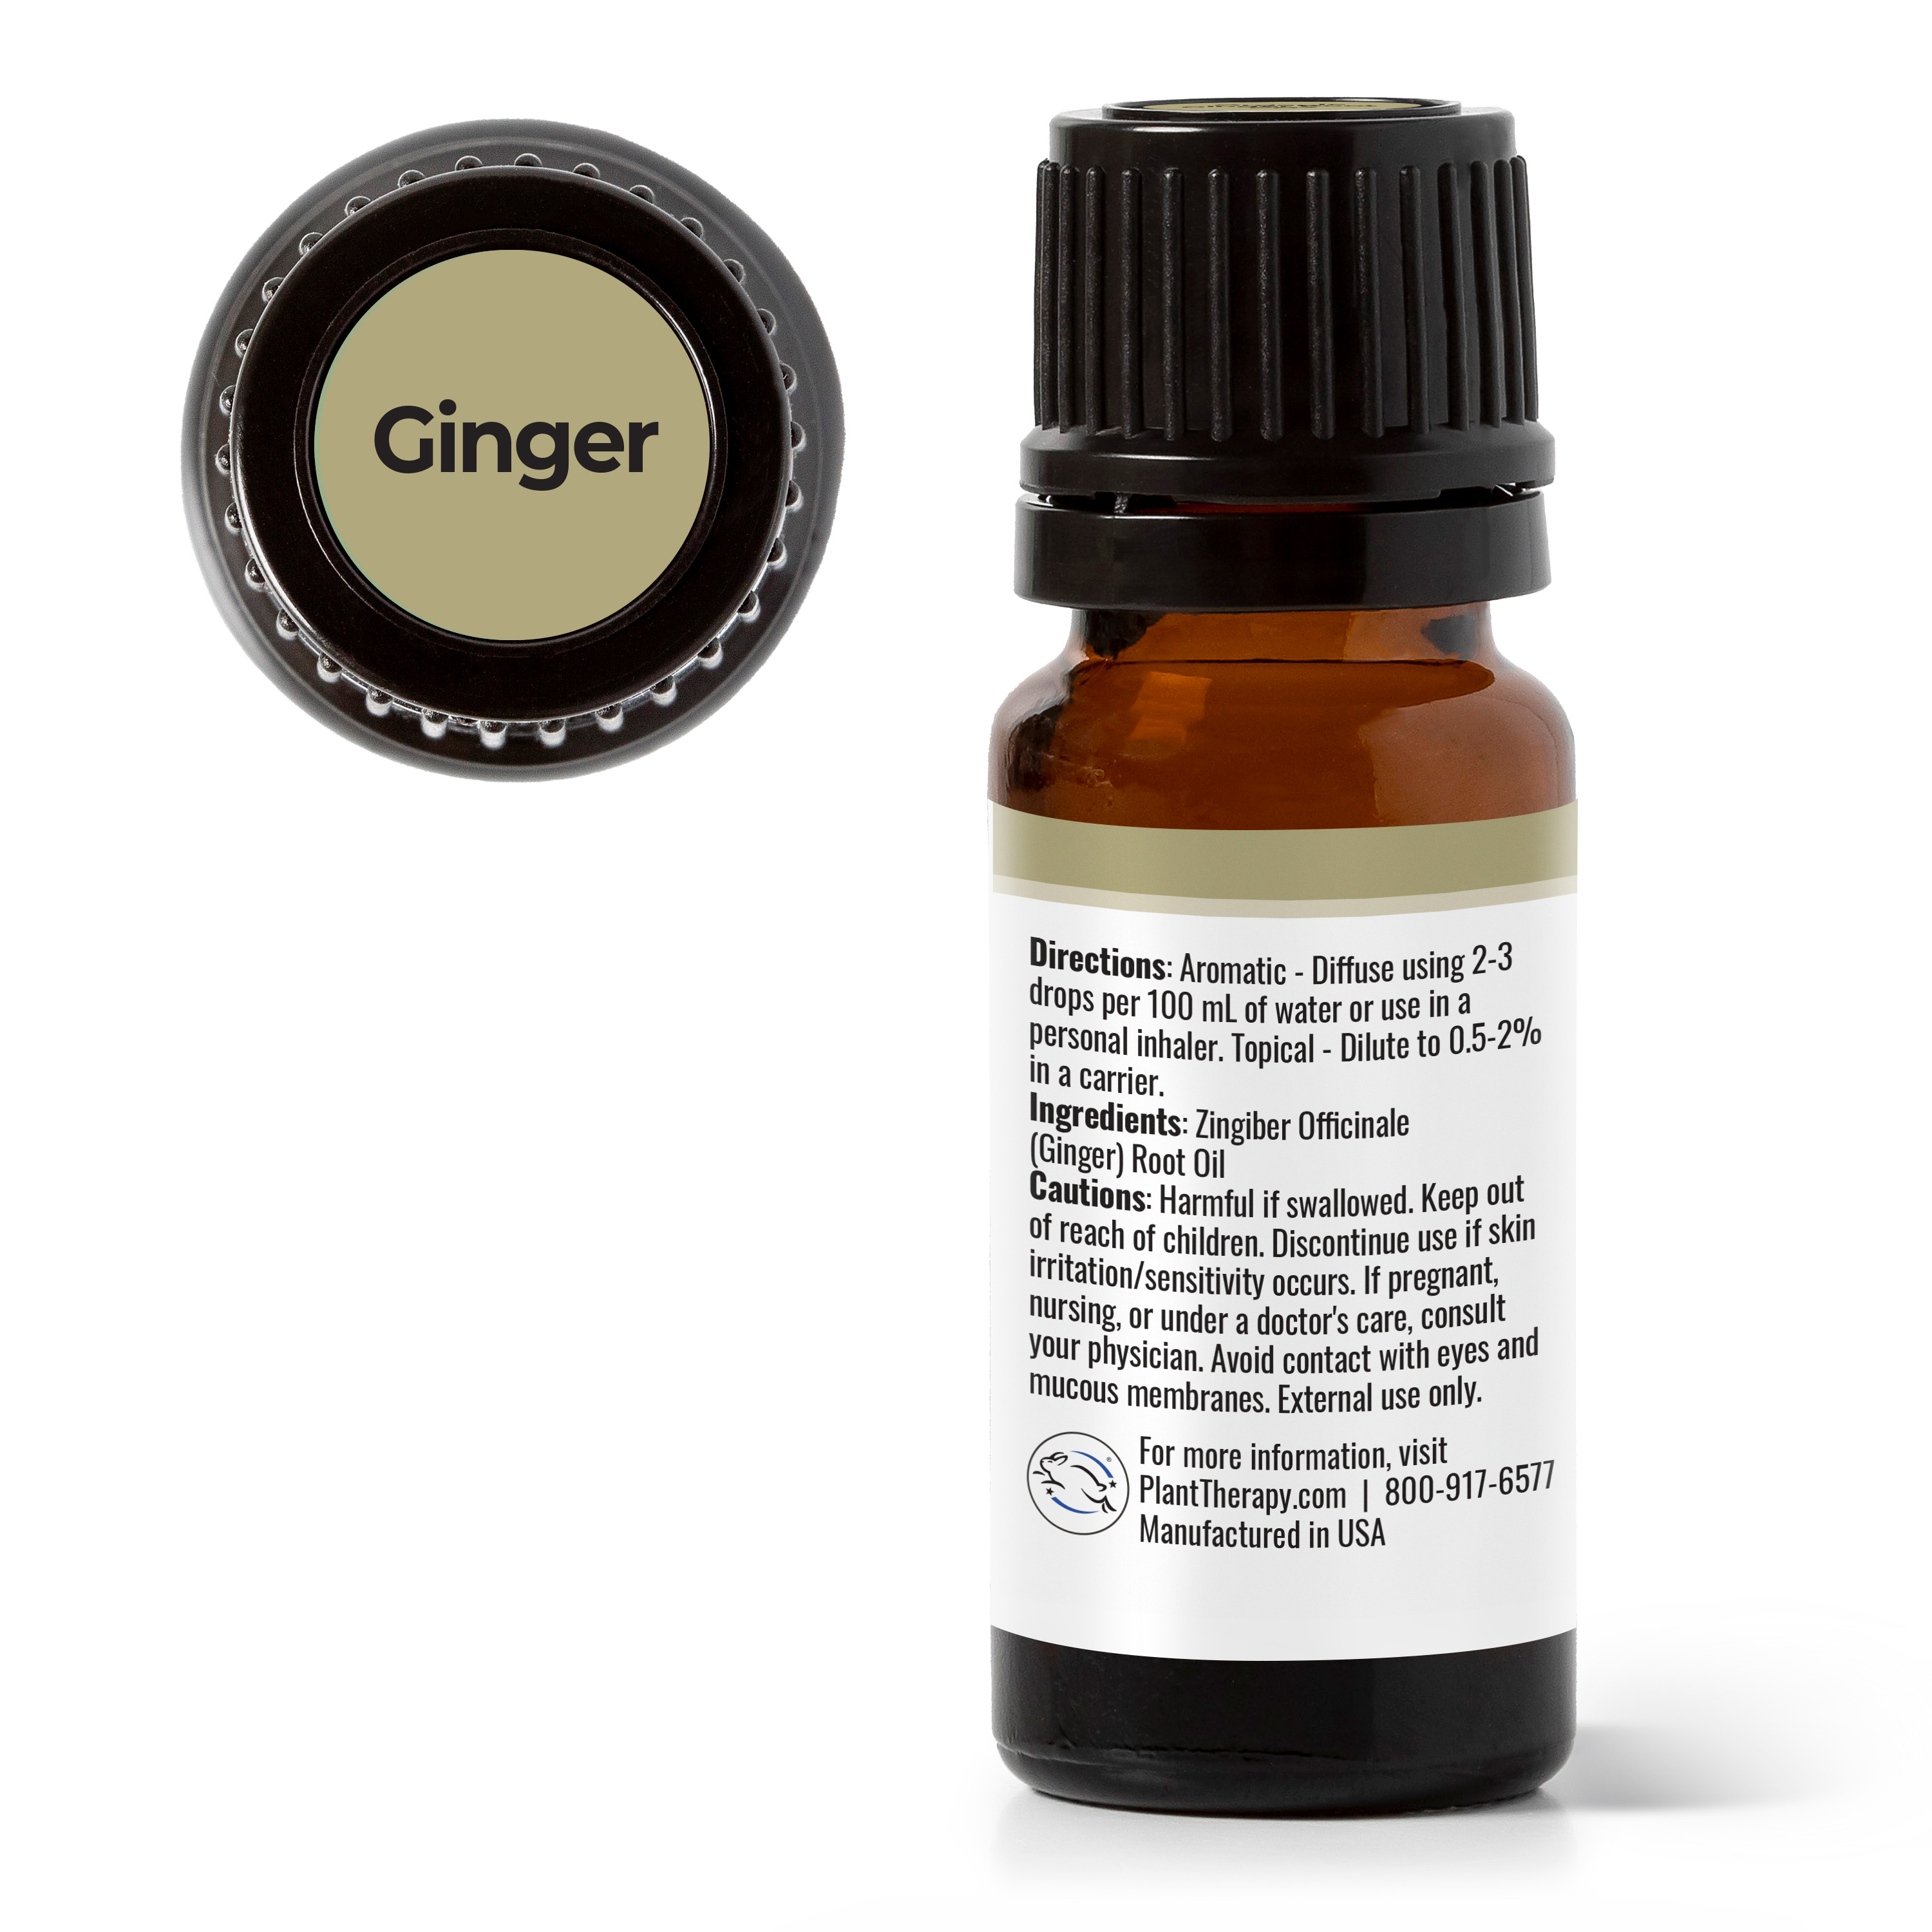 Plant Therapy Ginger Steam Distilled Essential Oil 10 mL (1/3 oz) 100% Pure, Undiluted, Natural Aromatherapy - image 3 of 7